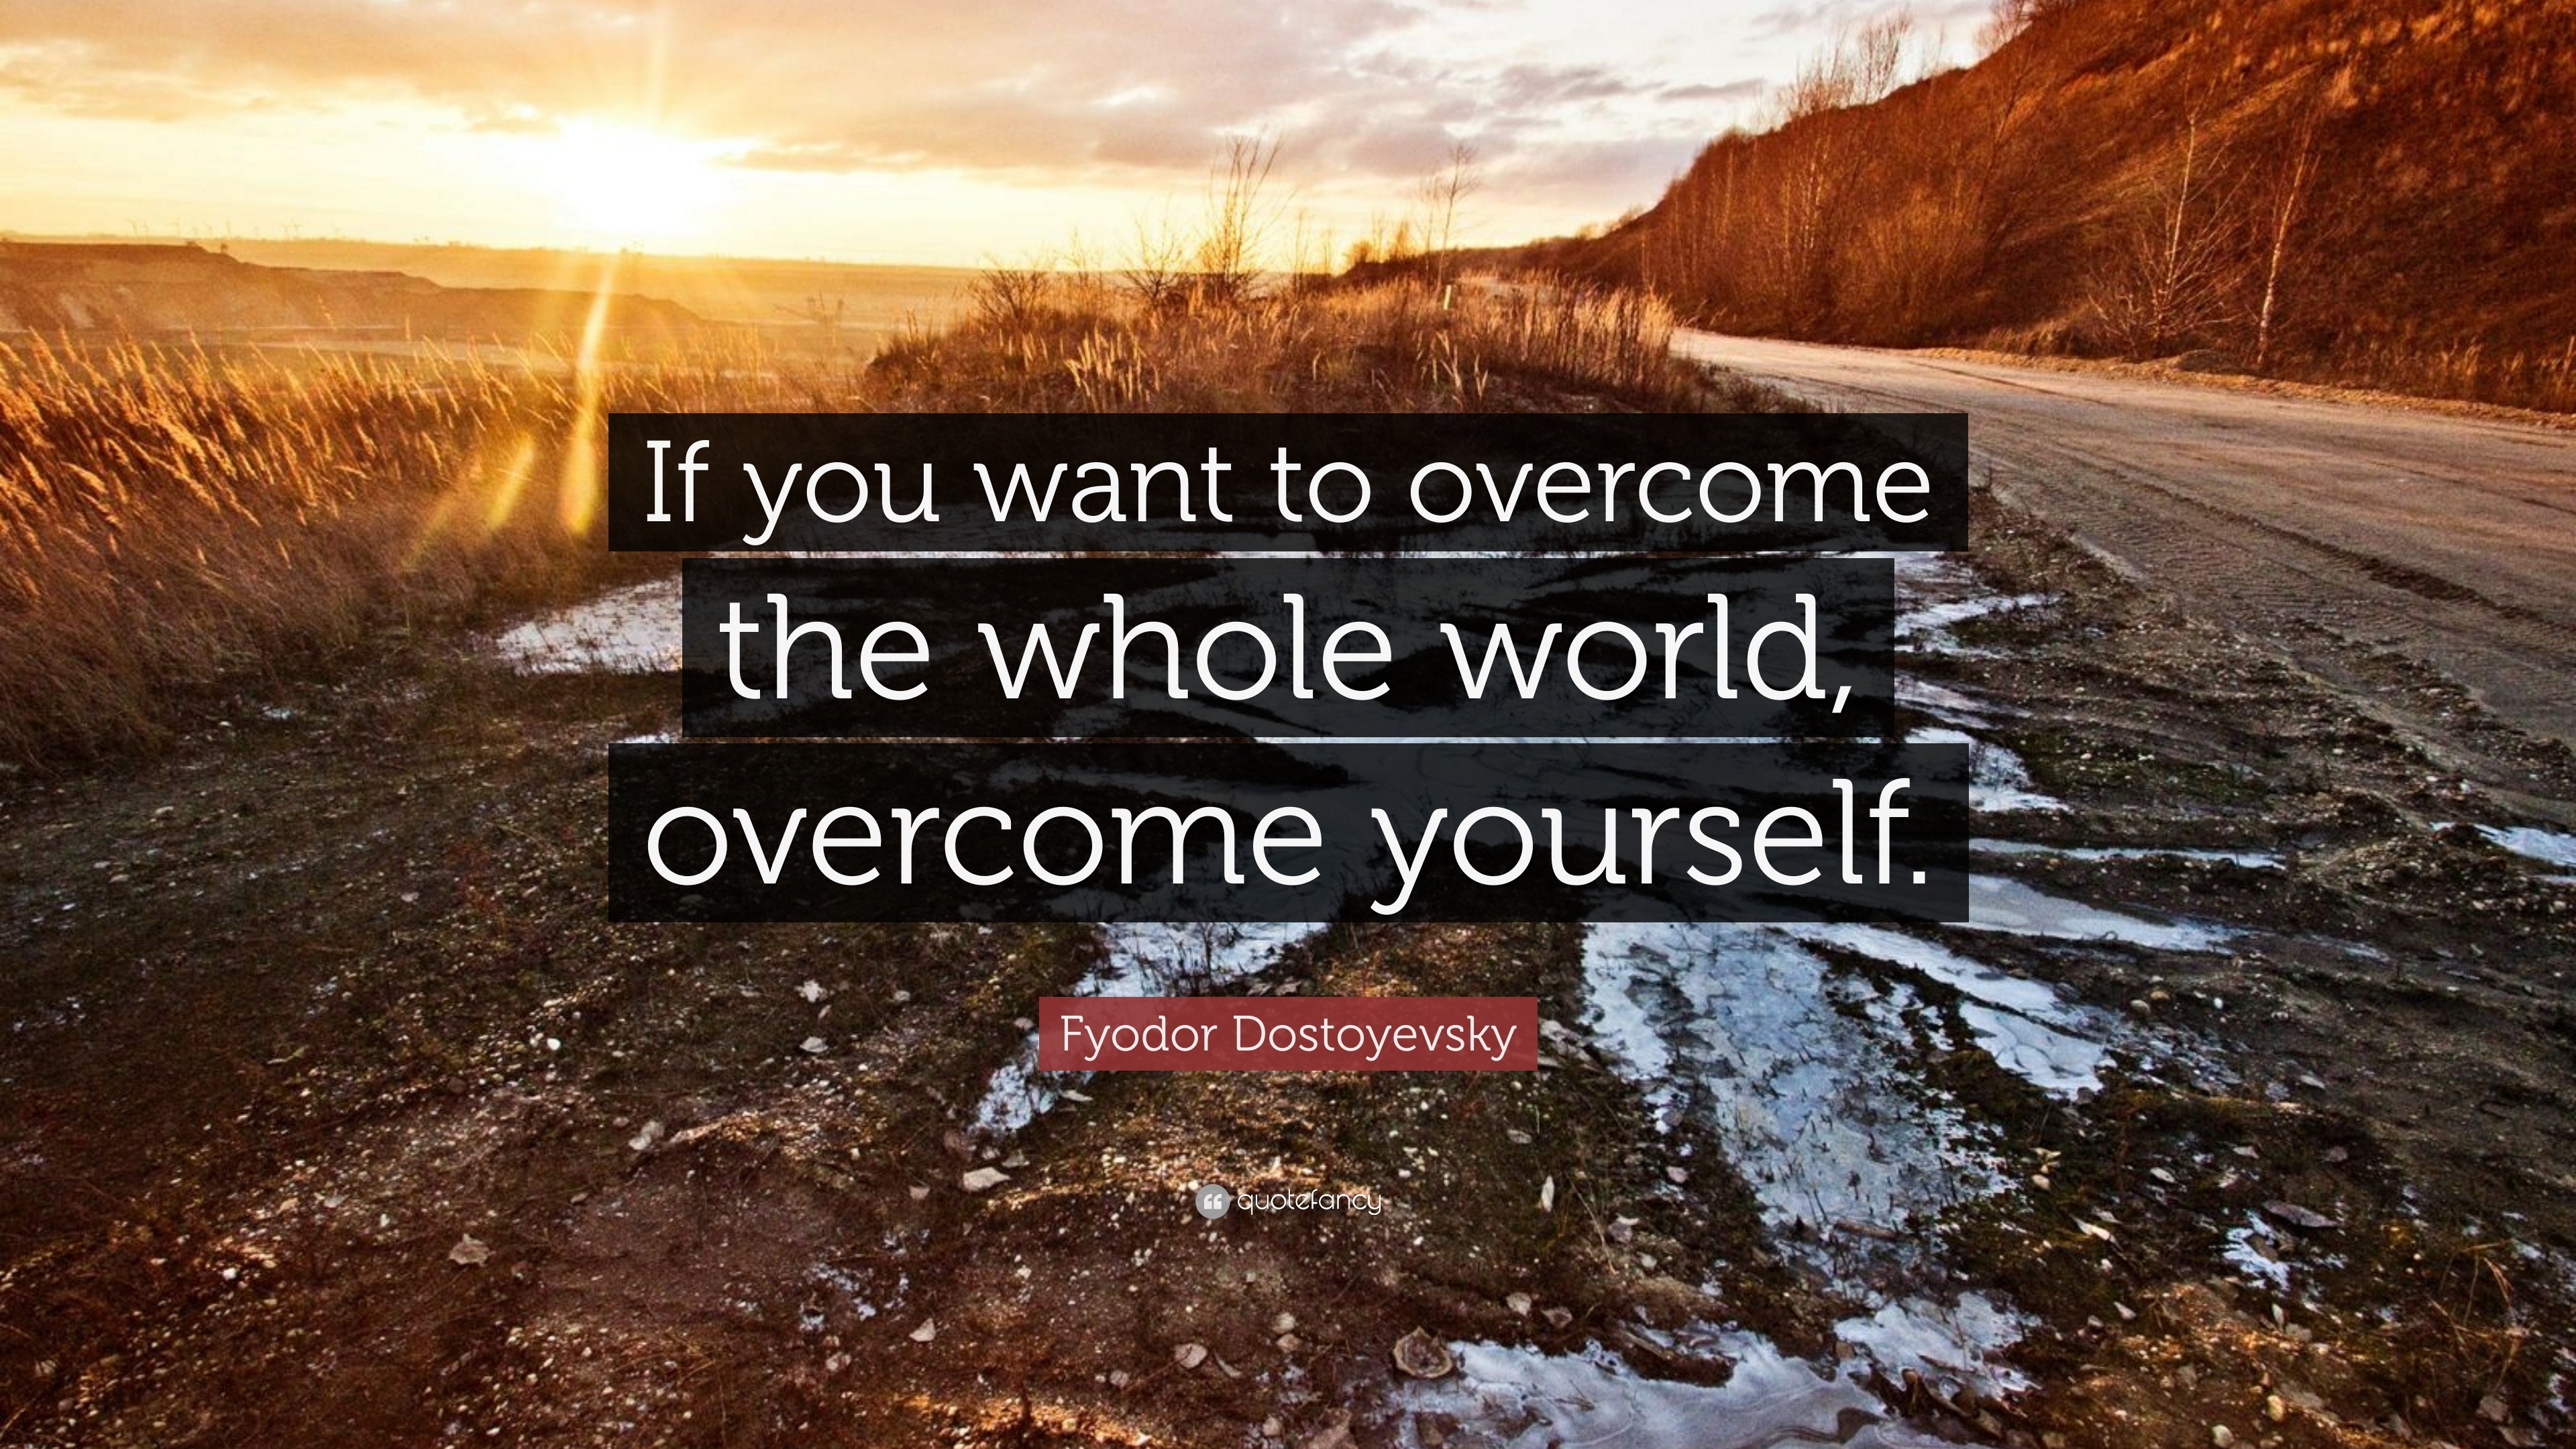 Fyodor Dostoyevsky Quote: “If you want to overcome the whole world ...